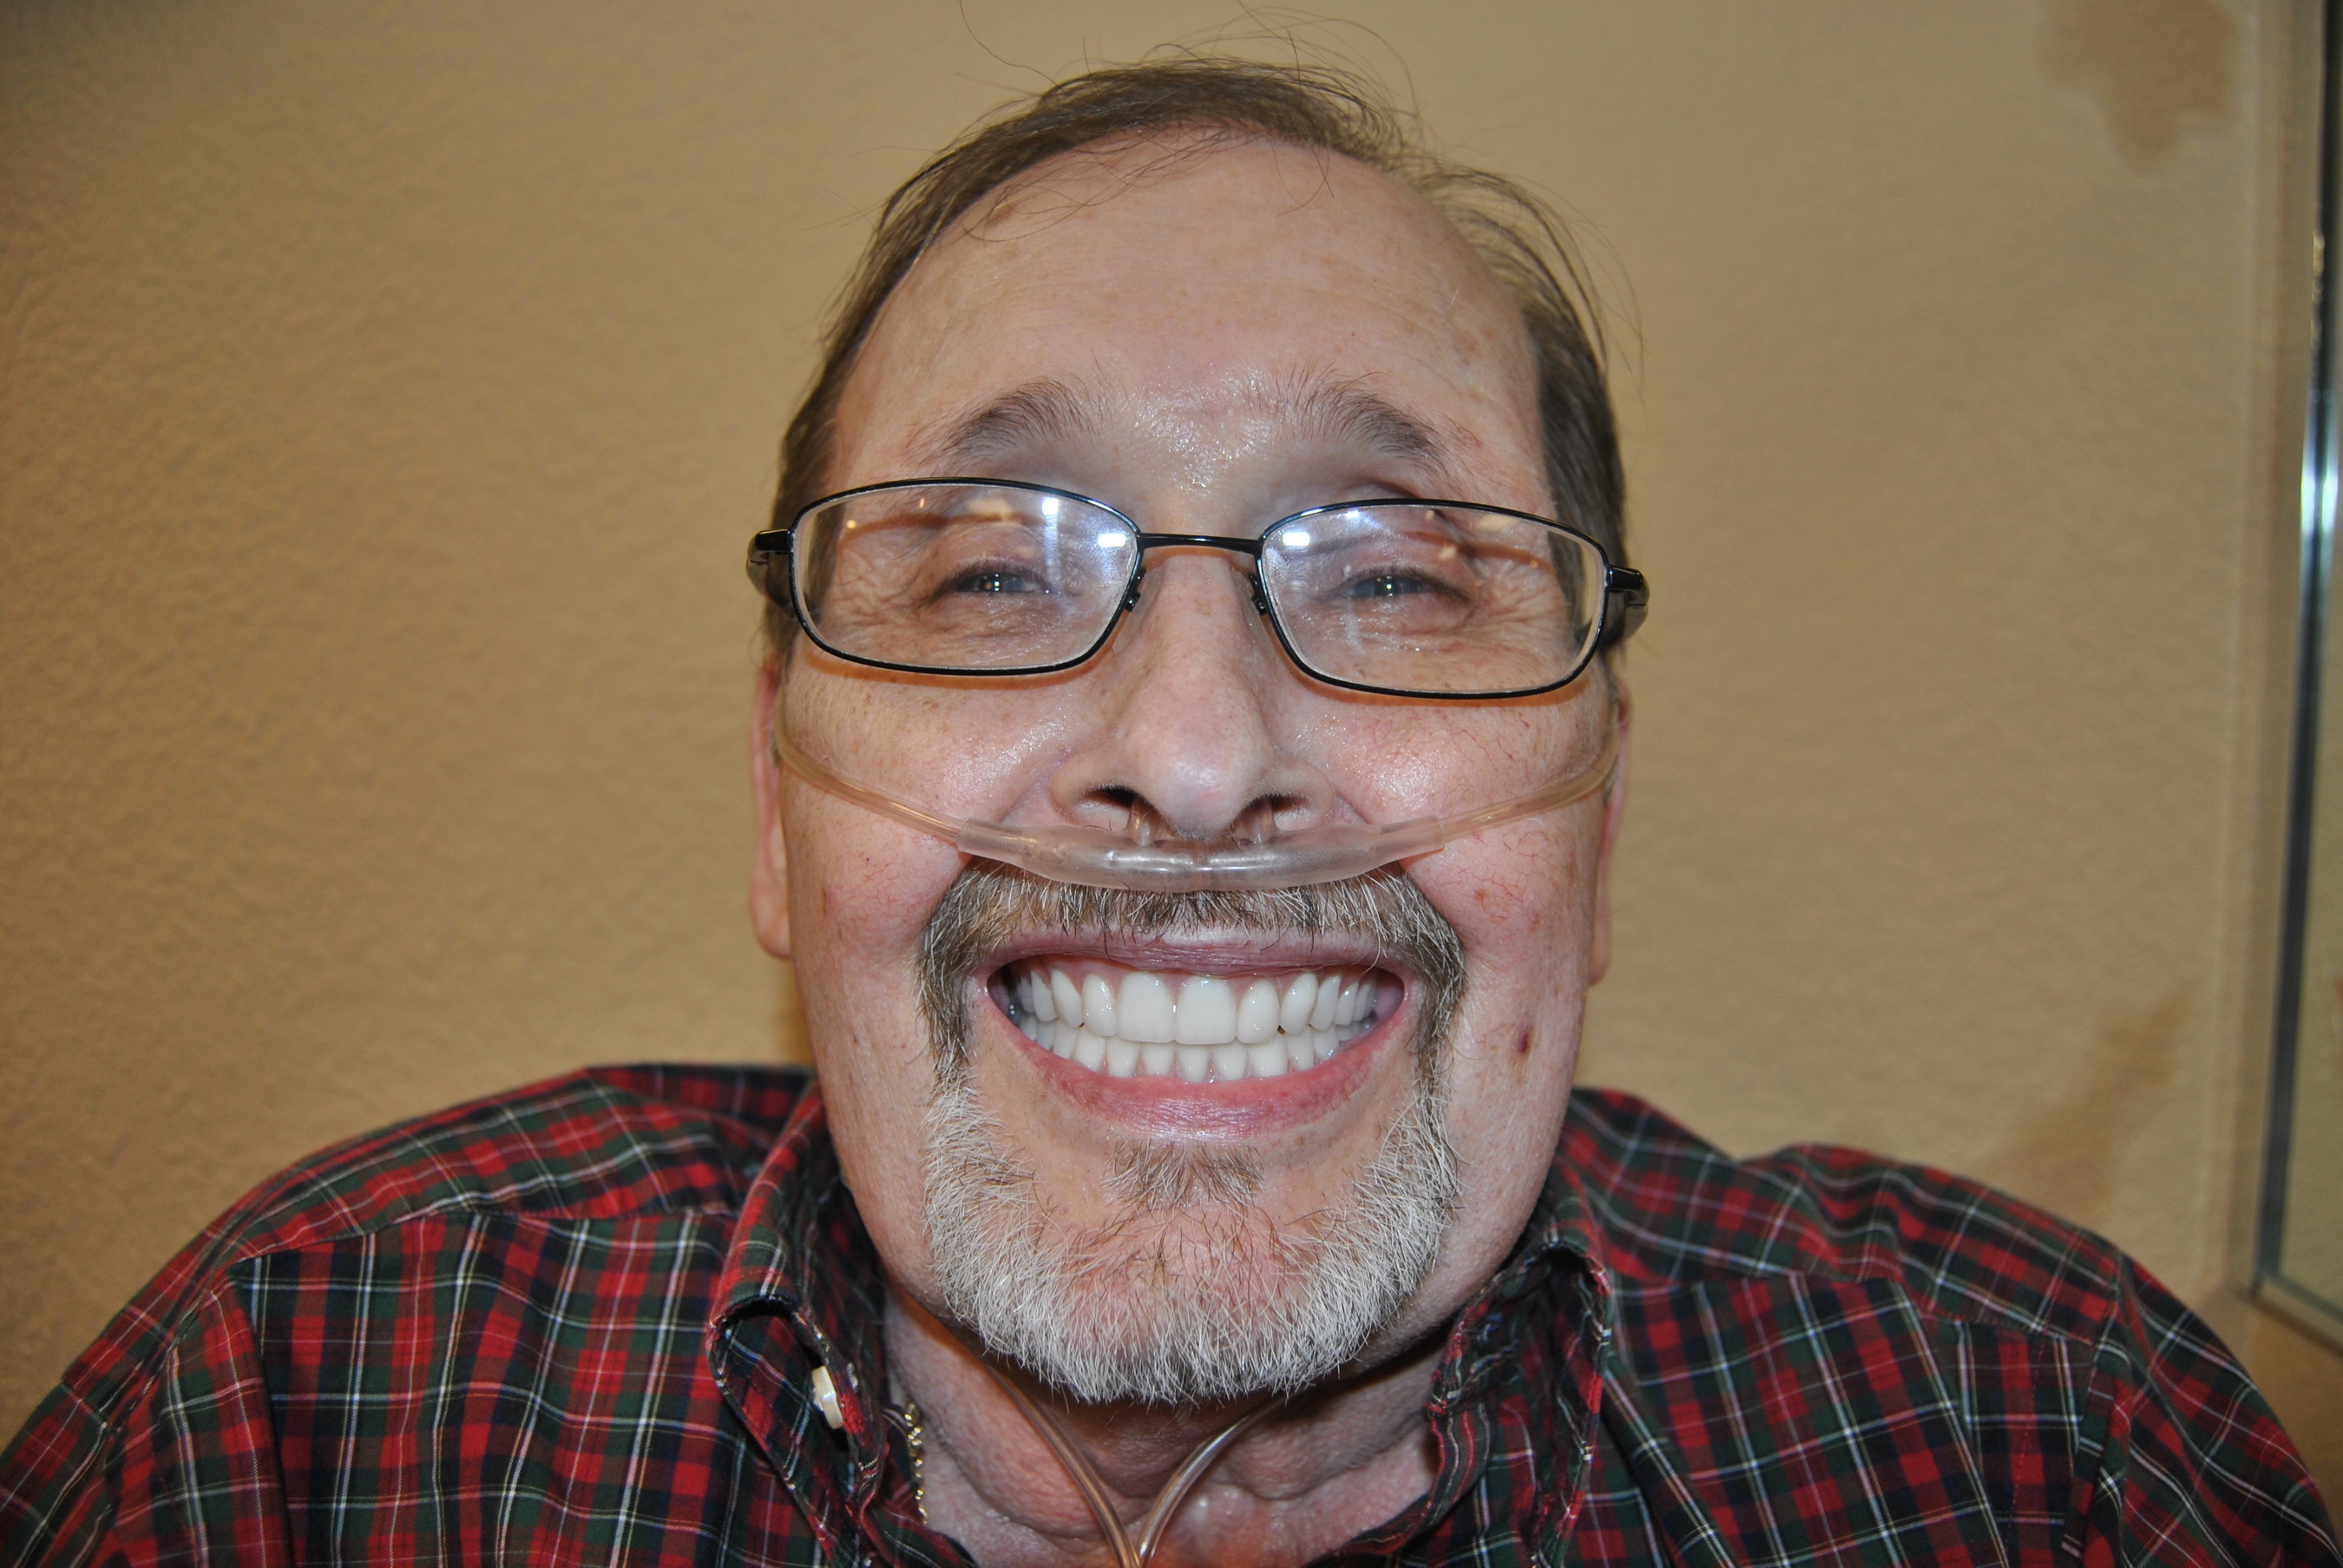 Deserving Military Veteran Kevin McPeek Receives a New Smile From Rodeo Dental and Orthodontics